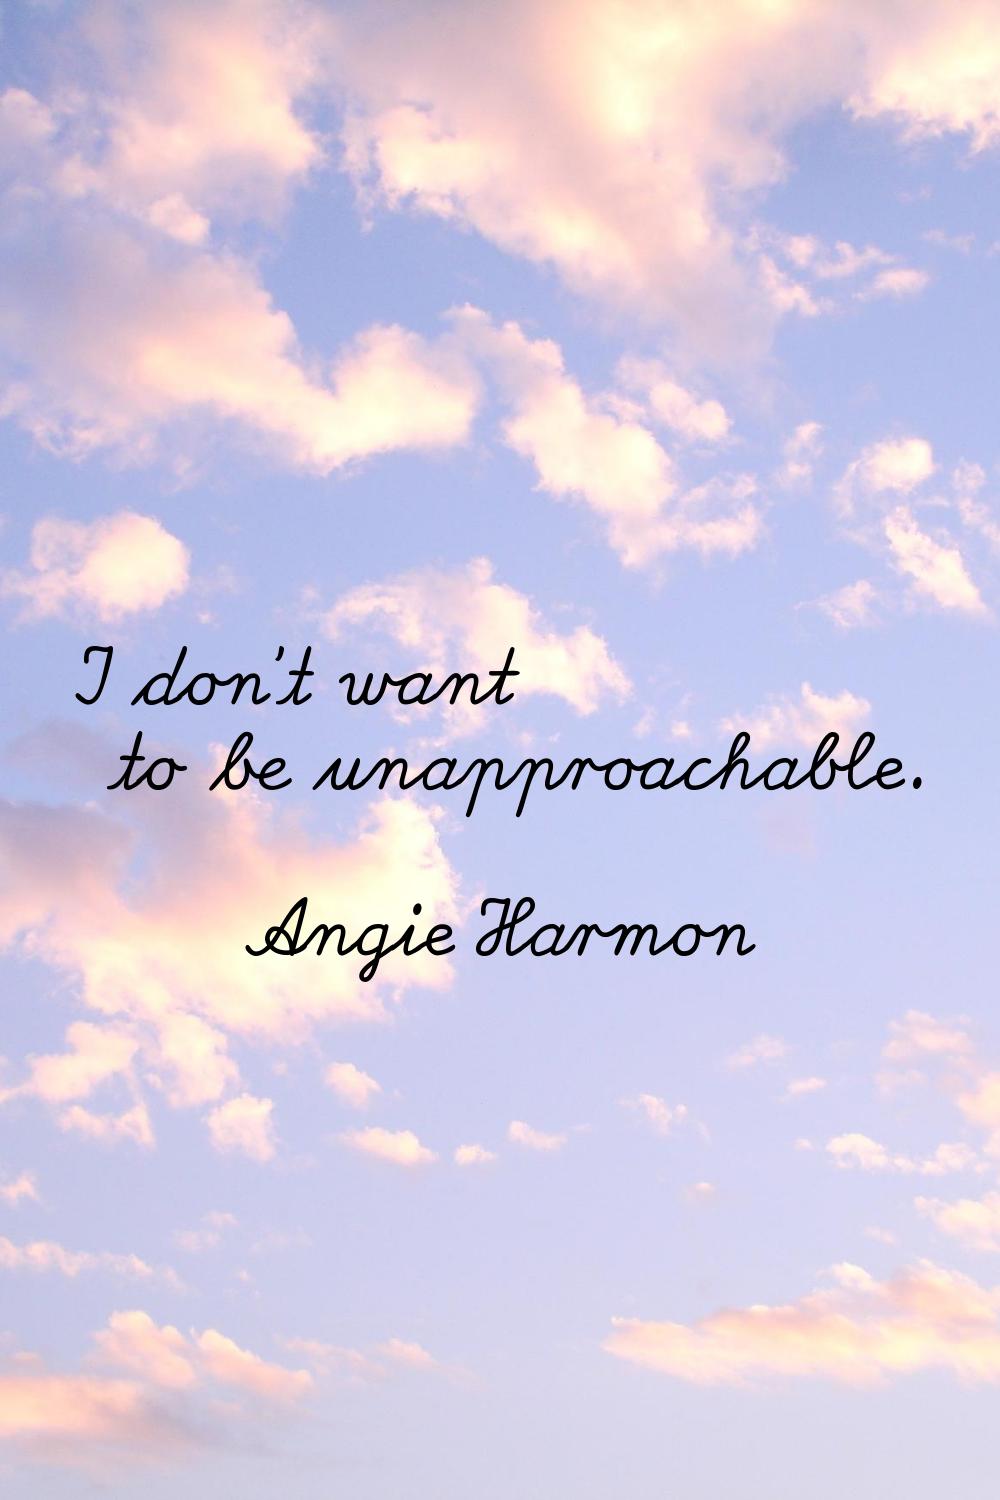 I don't want to be unapproachable.